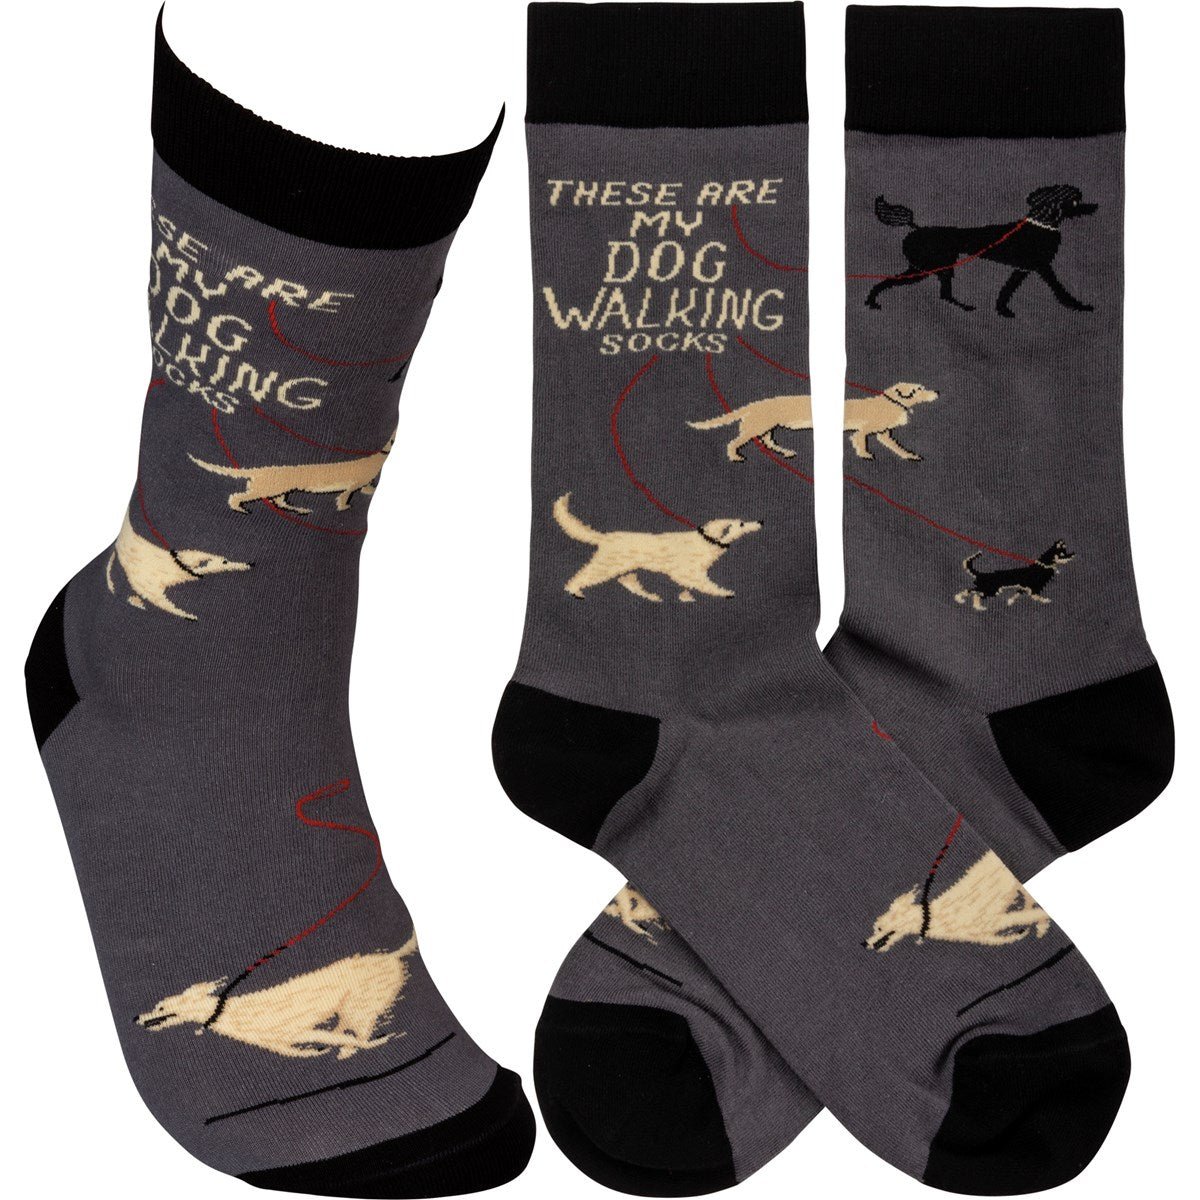 These Are My Dog Walking Socks | Black Gray Funny Novelty Socks with Cool Design | Specialty Dress Socks